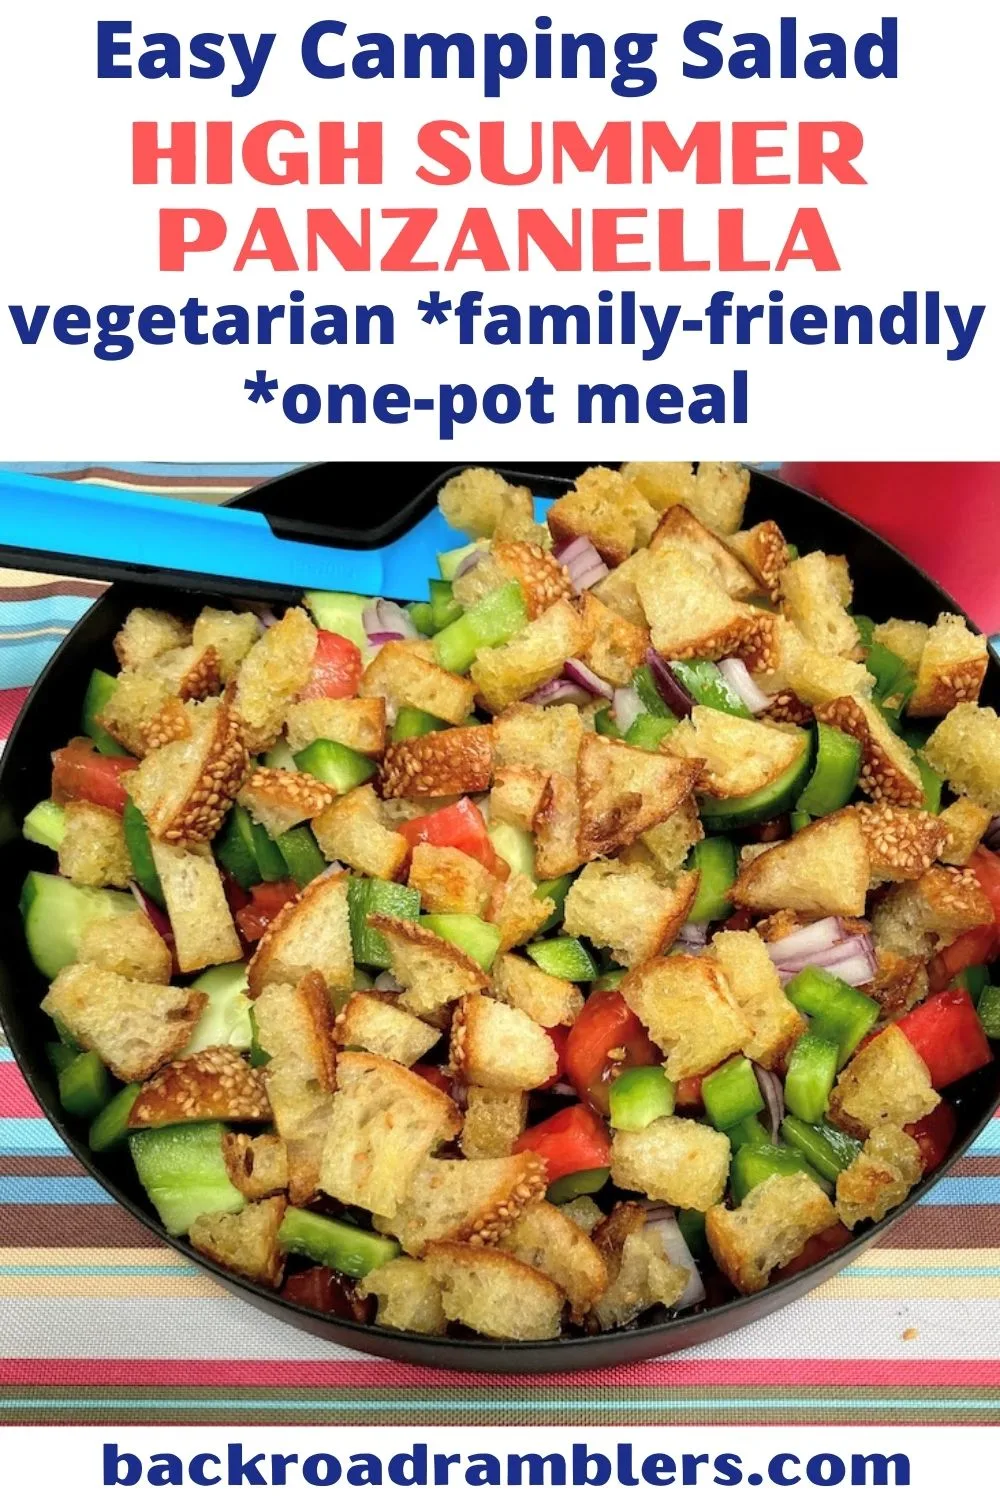 A photo of panzanella, an easy camping salad. Text overlay: Easy camping salad - High Summer Panzanella. Vegetarian, family-friendly, one-pot meal.